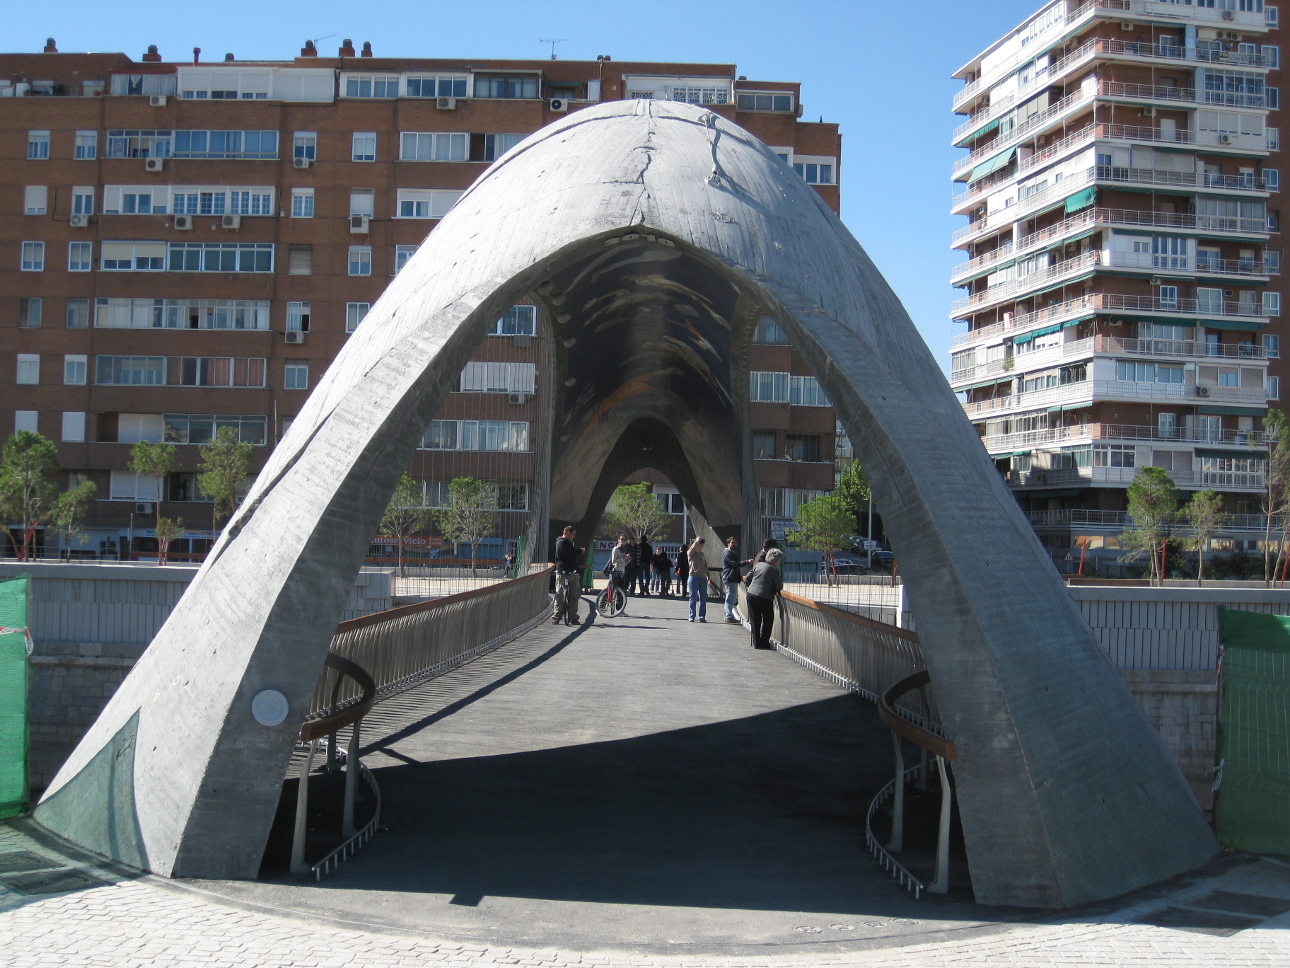 Madrid's Puentes Cascaras by West 8